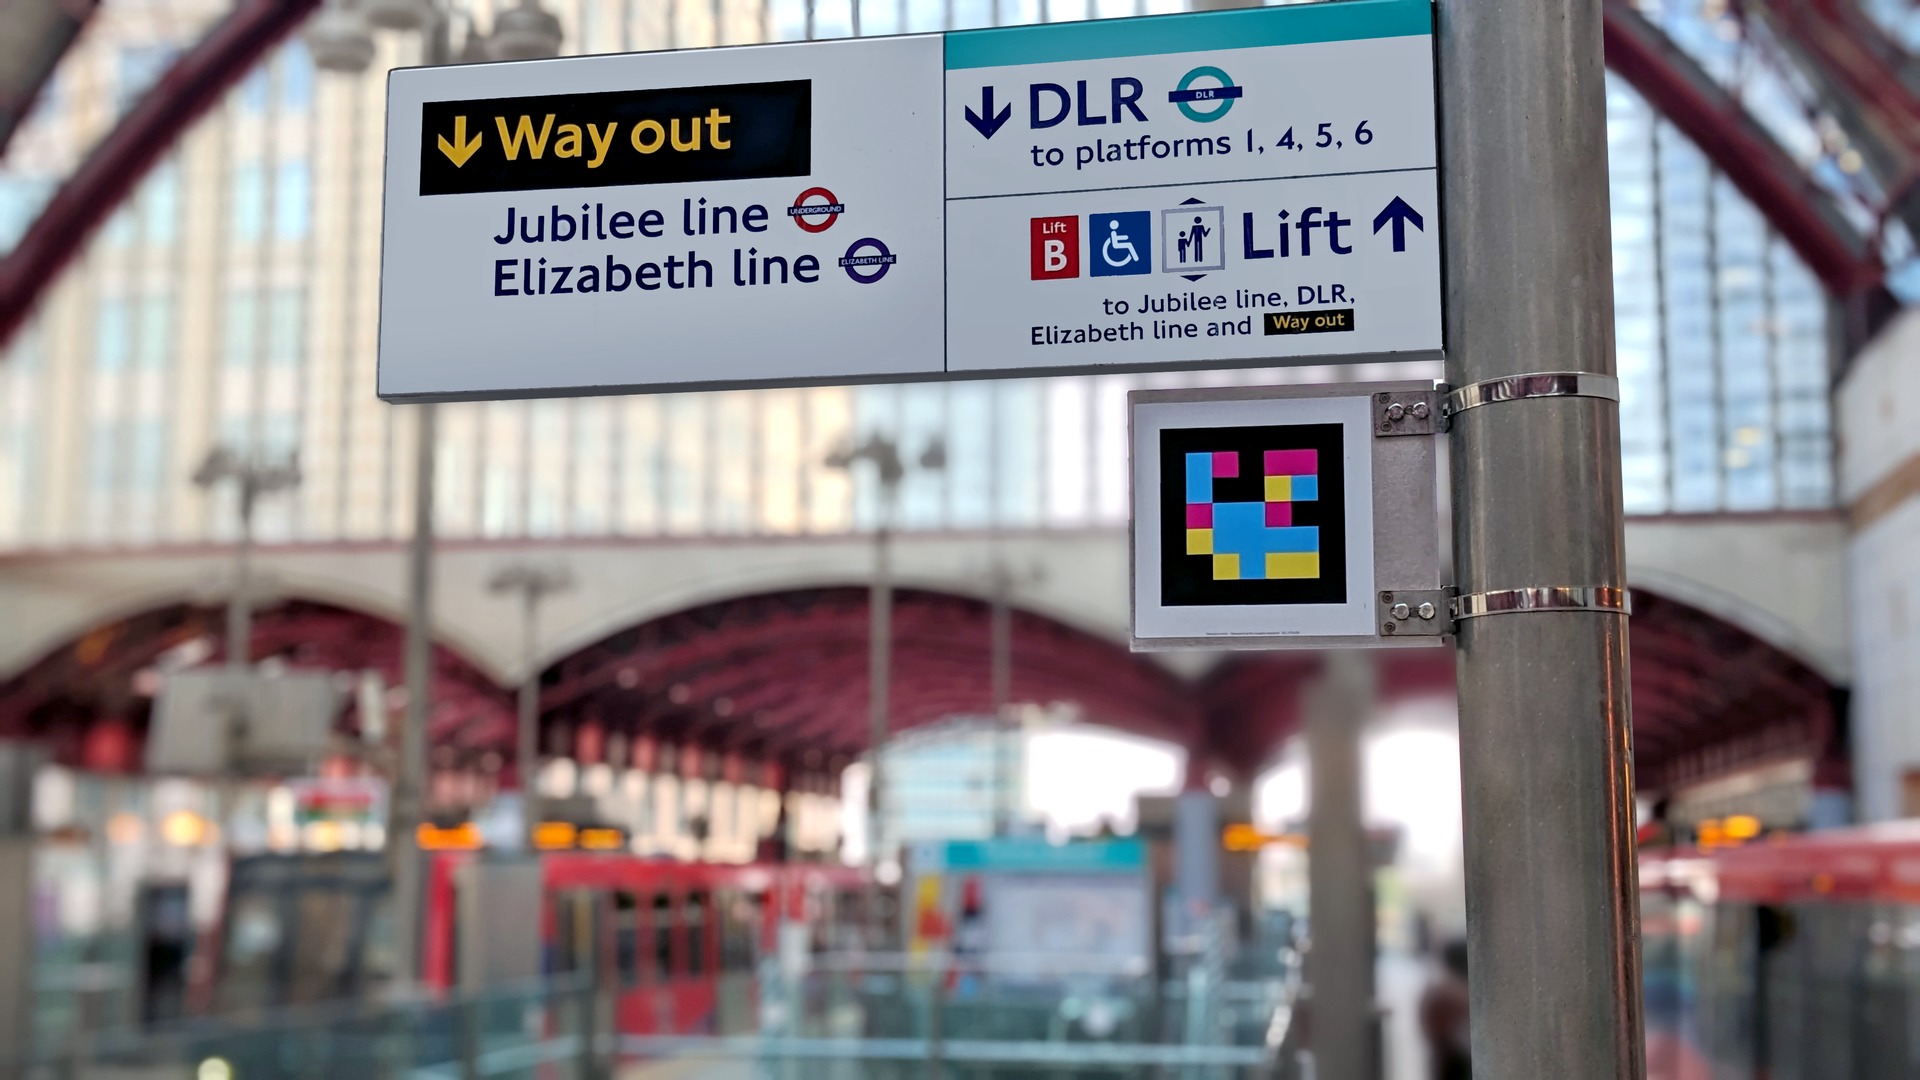 Transport for London and KeolisAmey Docklands trial new NaviLens technology at DLR stations to help blind and partially sighted customers navigate the network